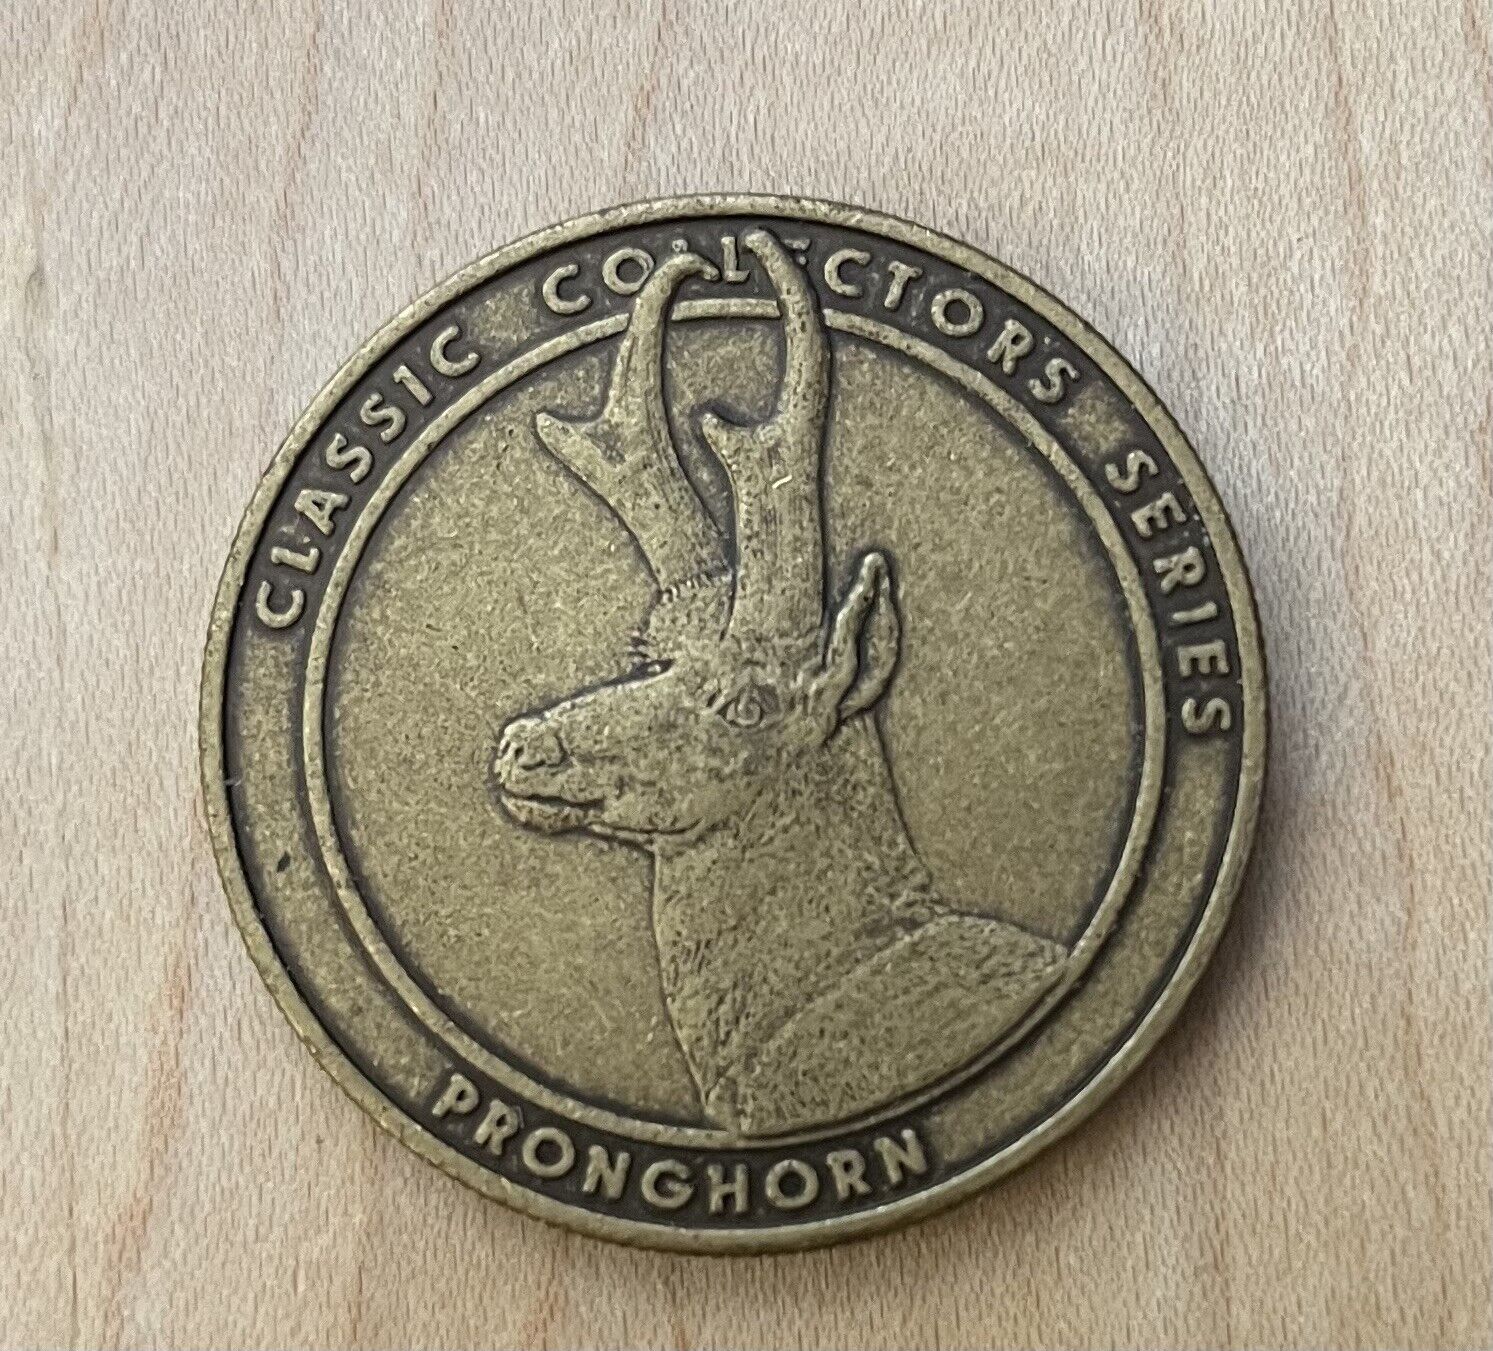 NRA National Rifle Association Classic Collectors Series Pronghorn Coin